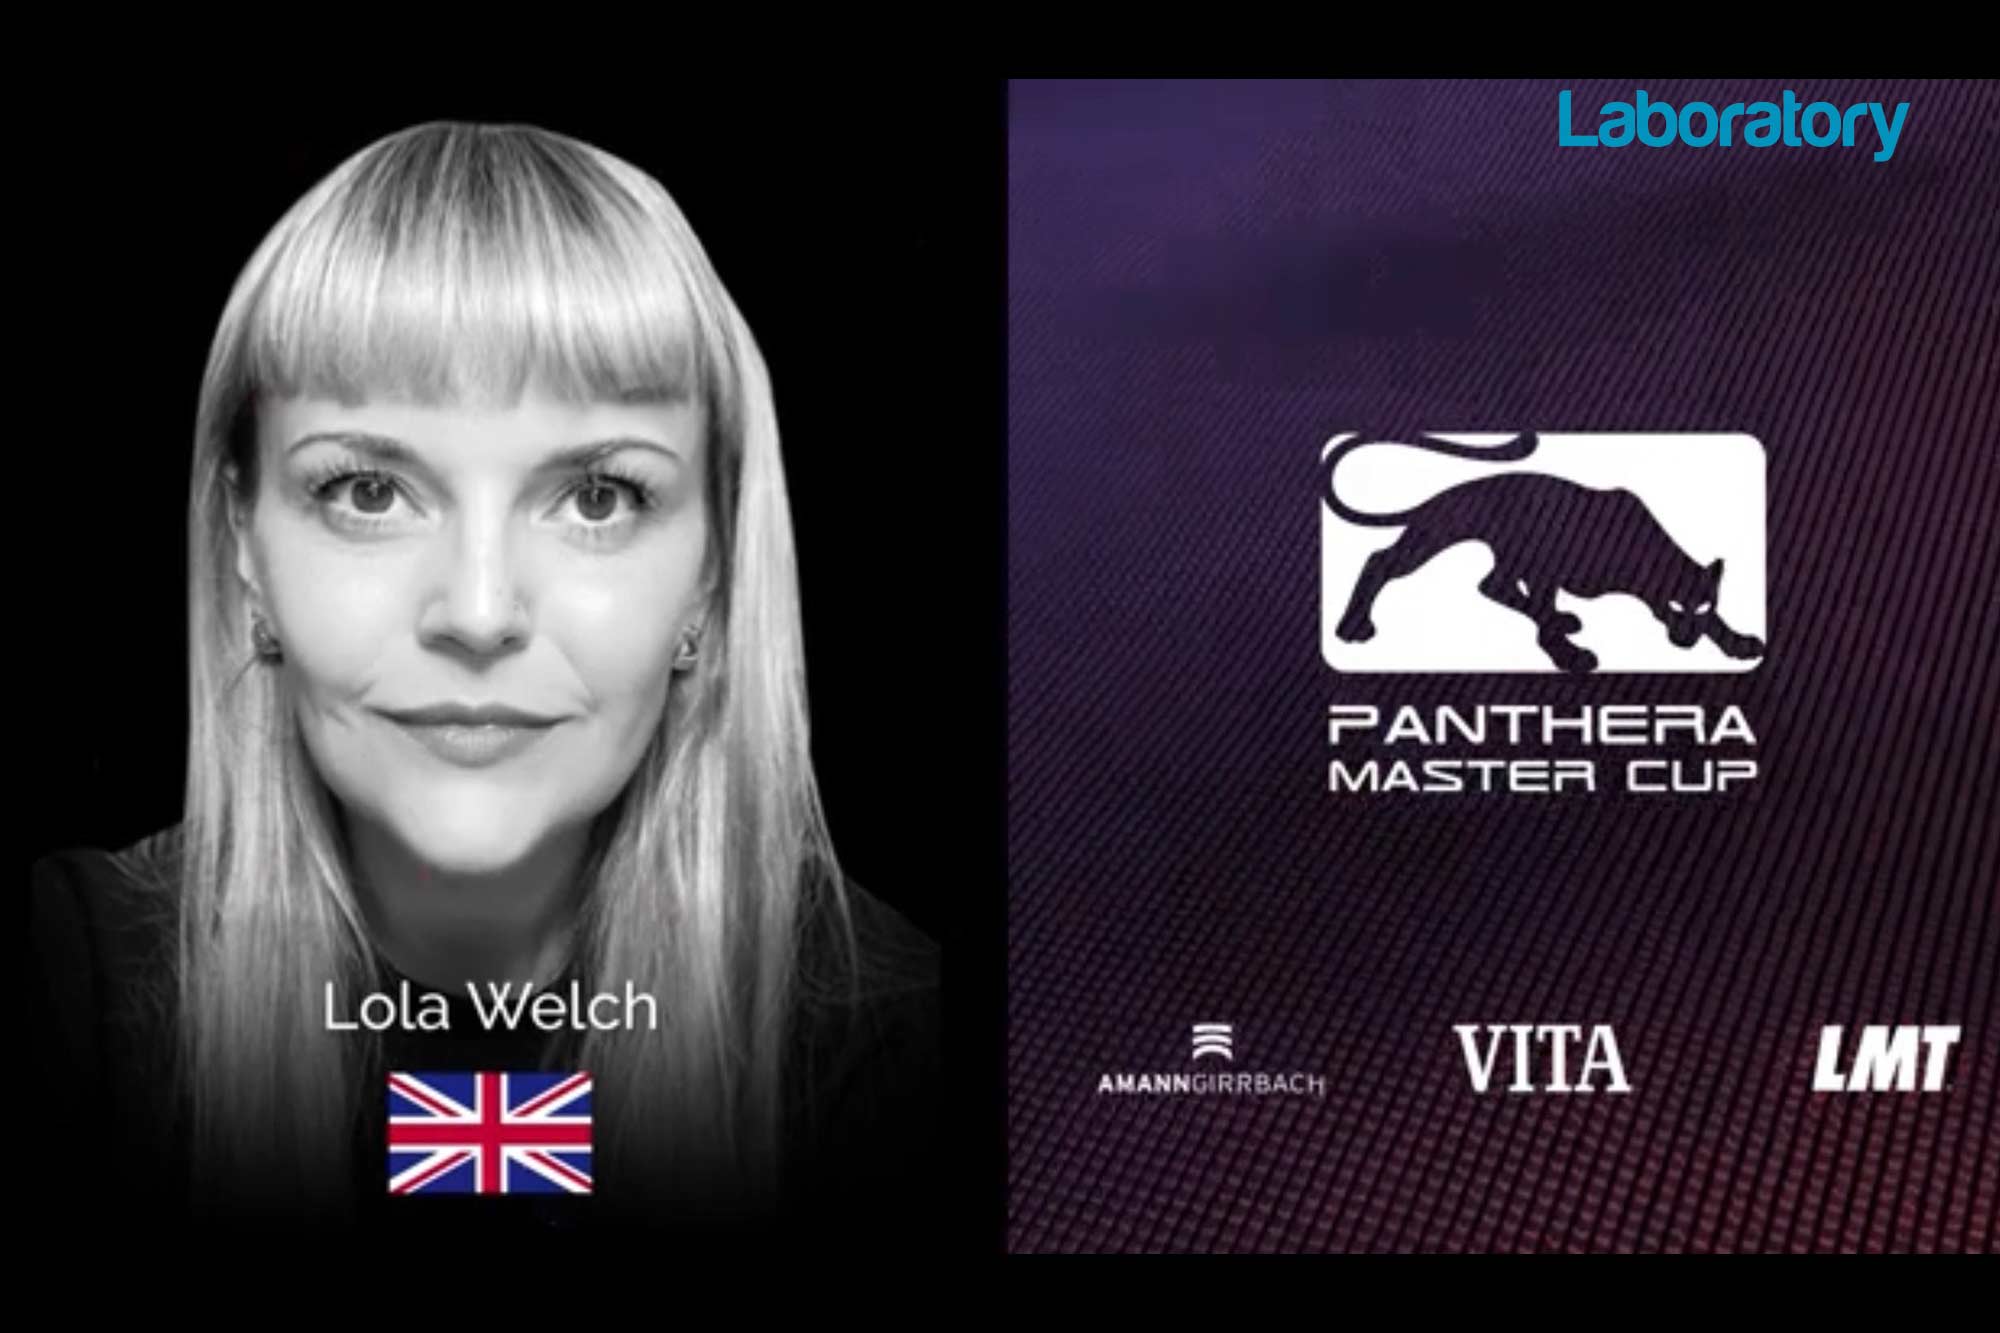 The 10 participants for the Pantera Master Cup have been revealed – we speak to Lola Welch about what the competition involves, why she chose to take part, and what being selected means to her.